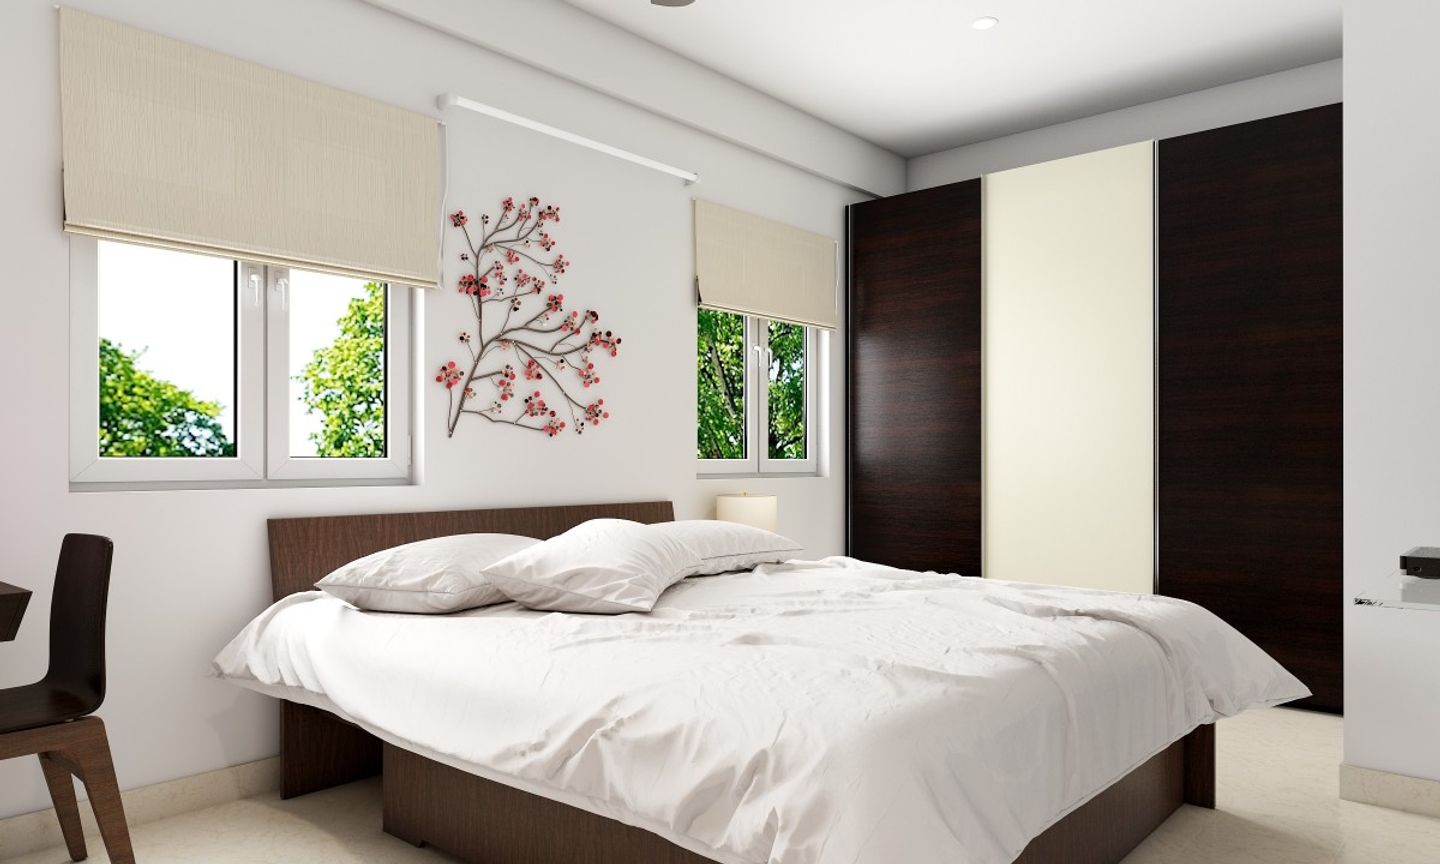 Modern Storage Max Master Bedroom Design With Wall Art